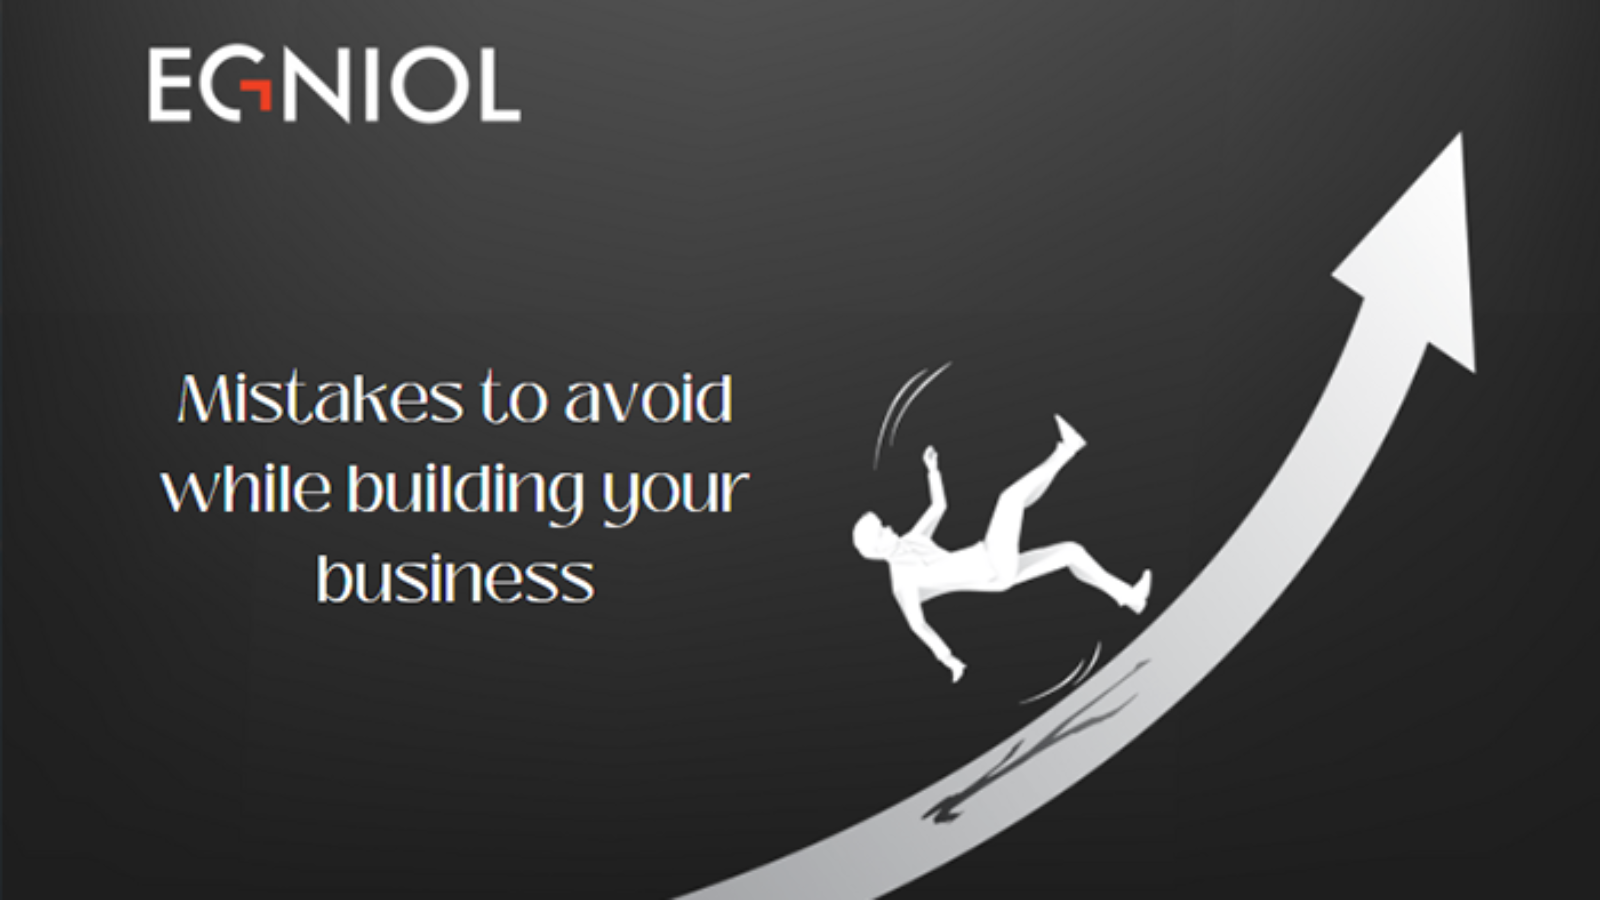 9 Mistakes to avoid while building your business - By Egniol